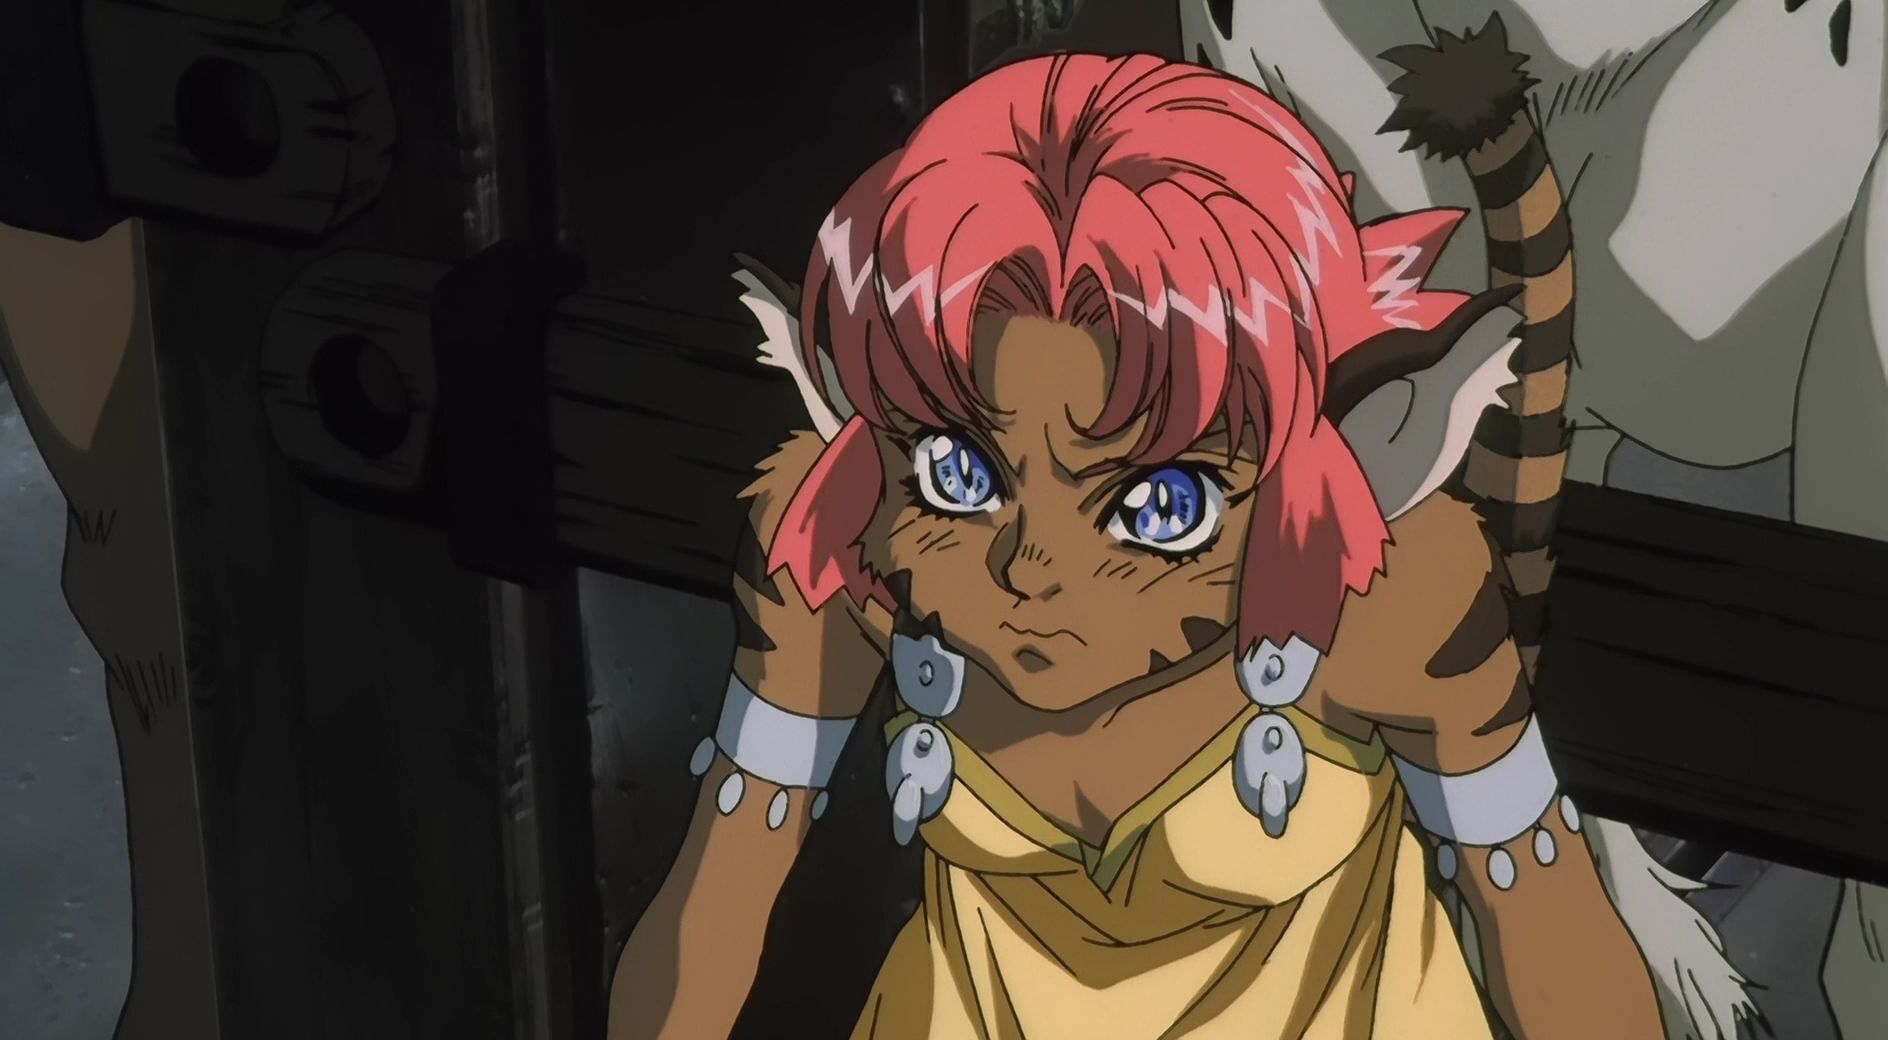 Merle from Vision of Escaflowne